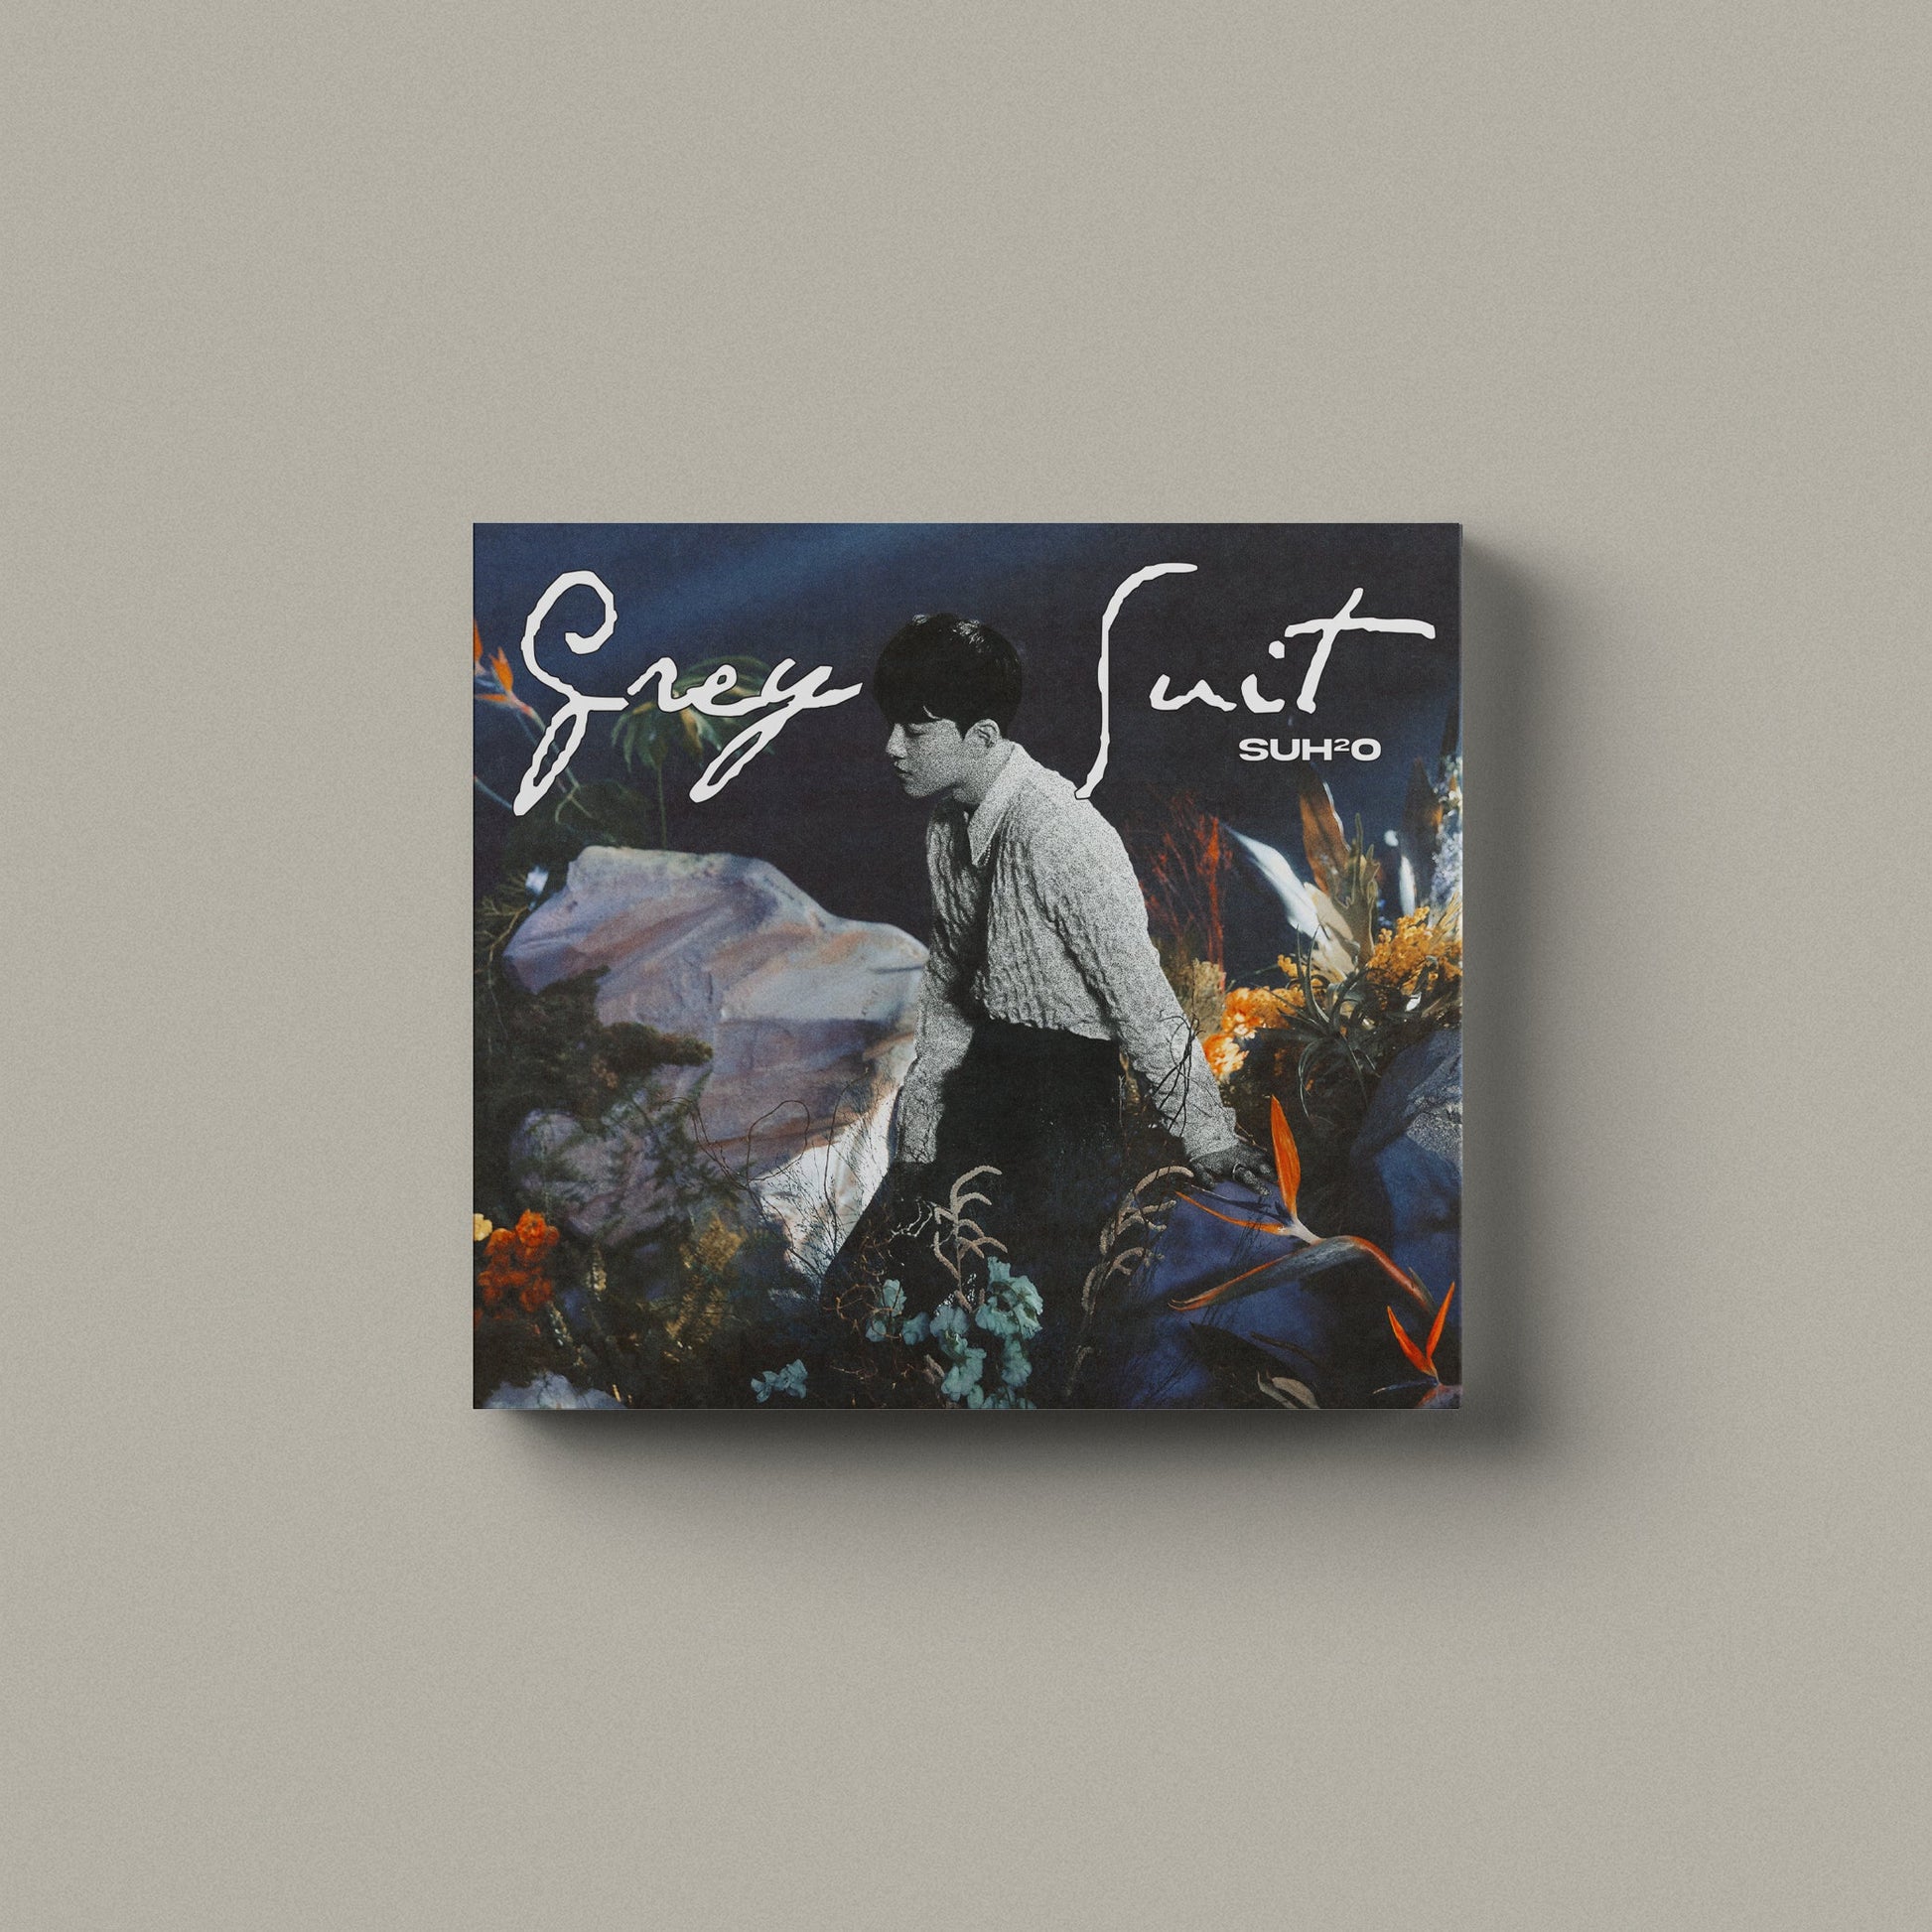 SUHO (EXO) 2ND MINI ALBUM 'GREY SUIT' (DIGIPACK) COVER